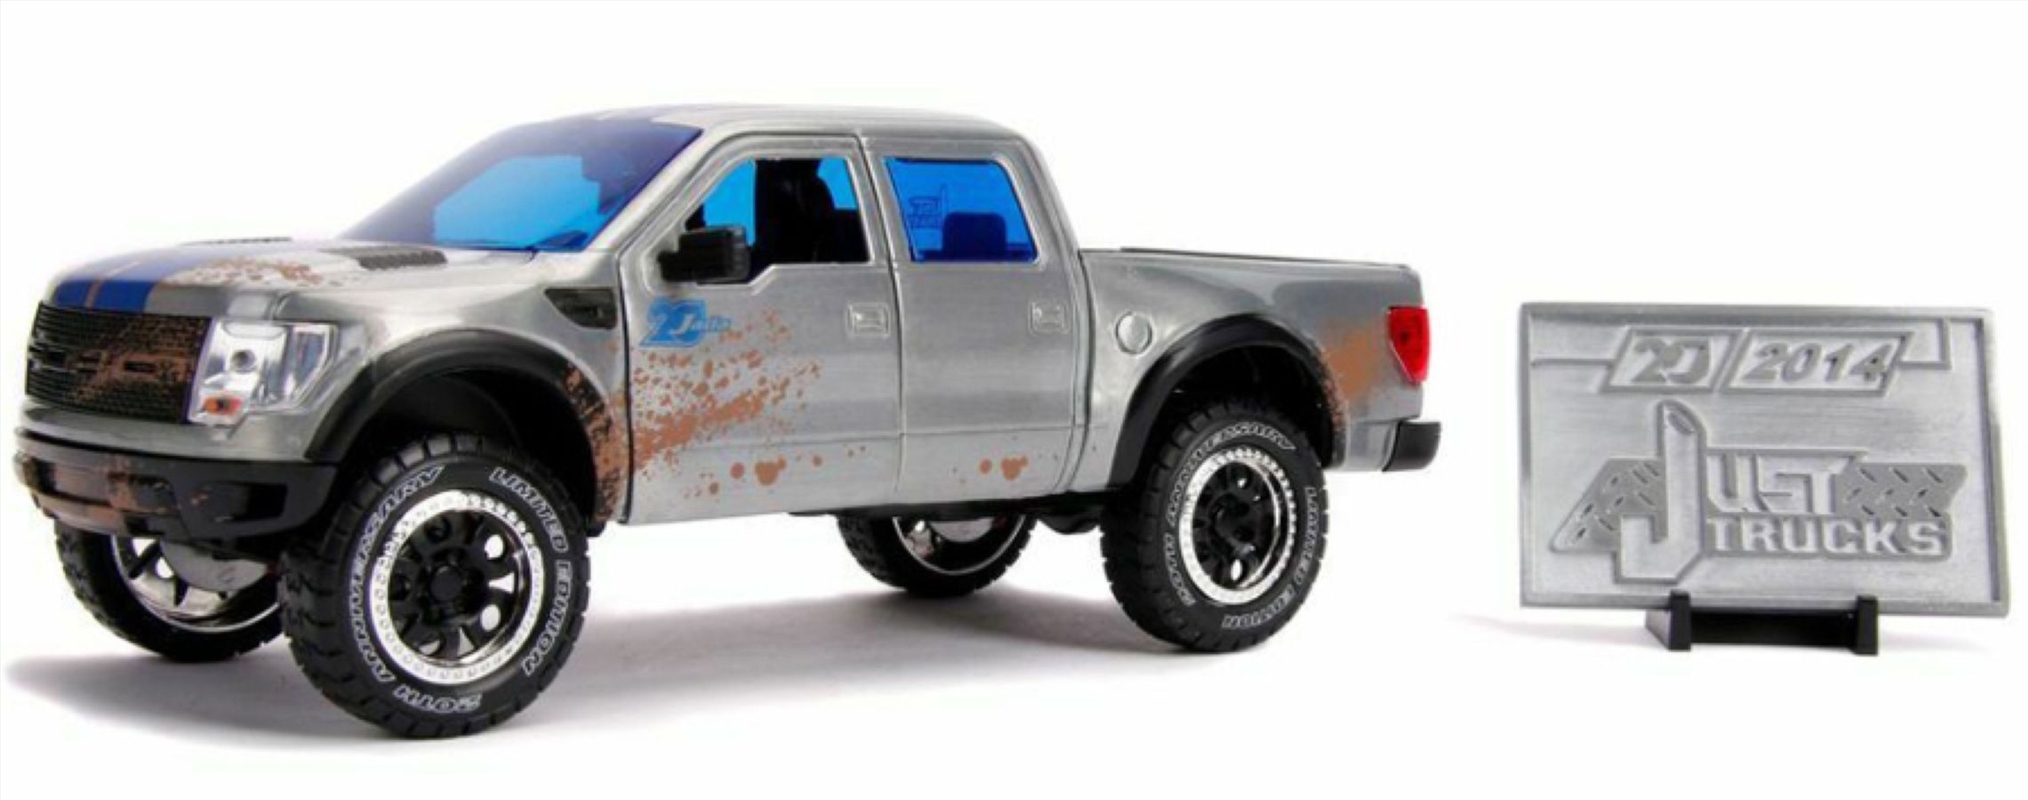 Just Trucks - 2011 Ford F-150 SVT Raptor 1:24 Scale/Product Detail/Figurines